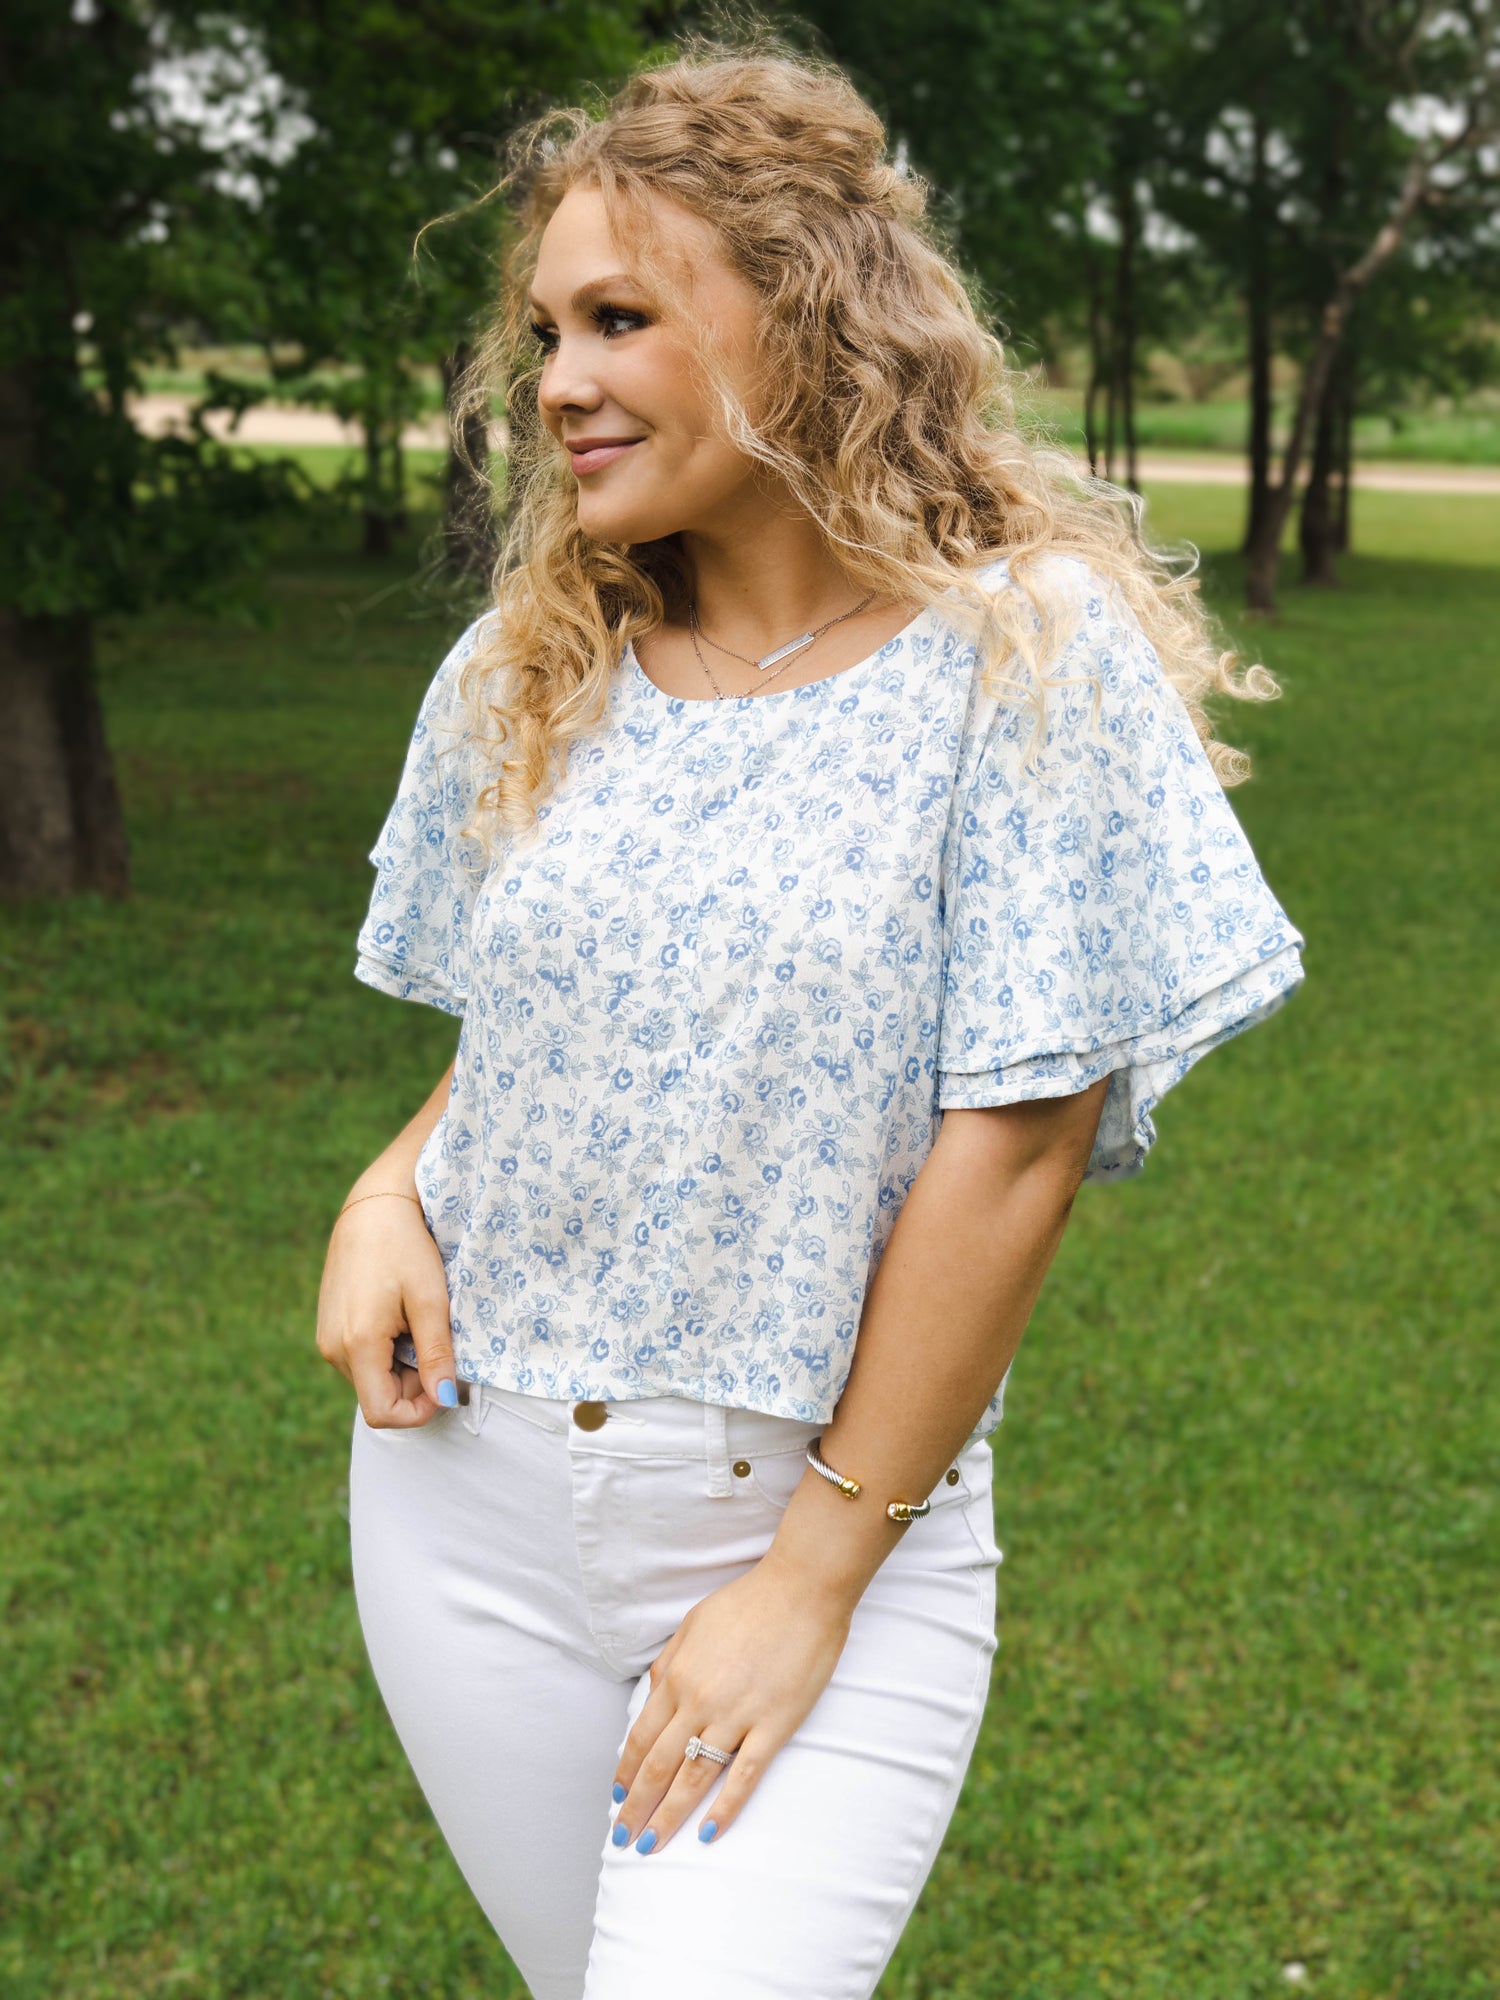 This image of a woman features the product Classic Flutter Top - Blue Jay Floral. This top has a keyhole back and flowy double ruffle sleeves. It is a blue rose pattern on a pale background.